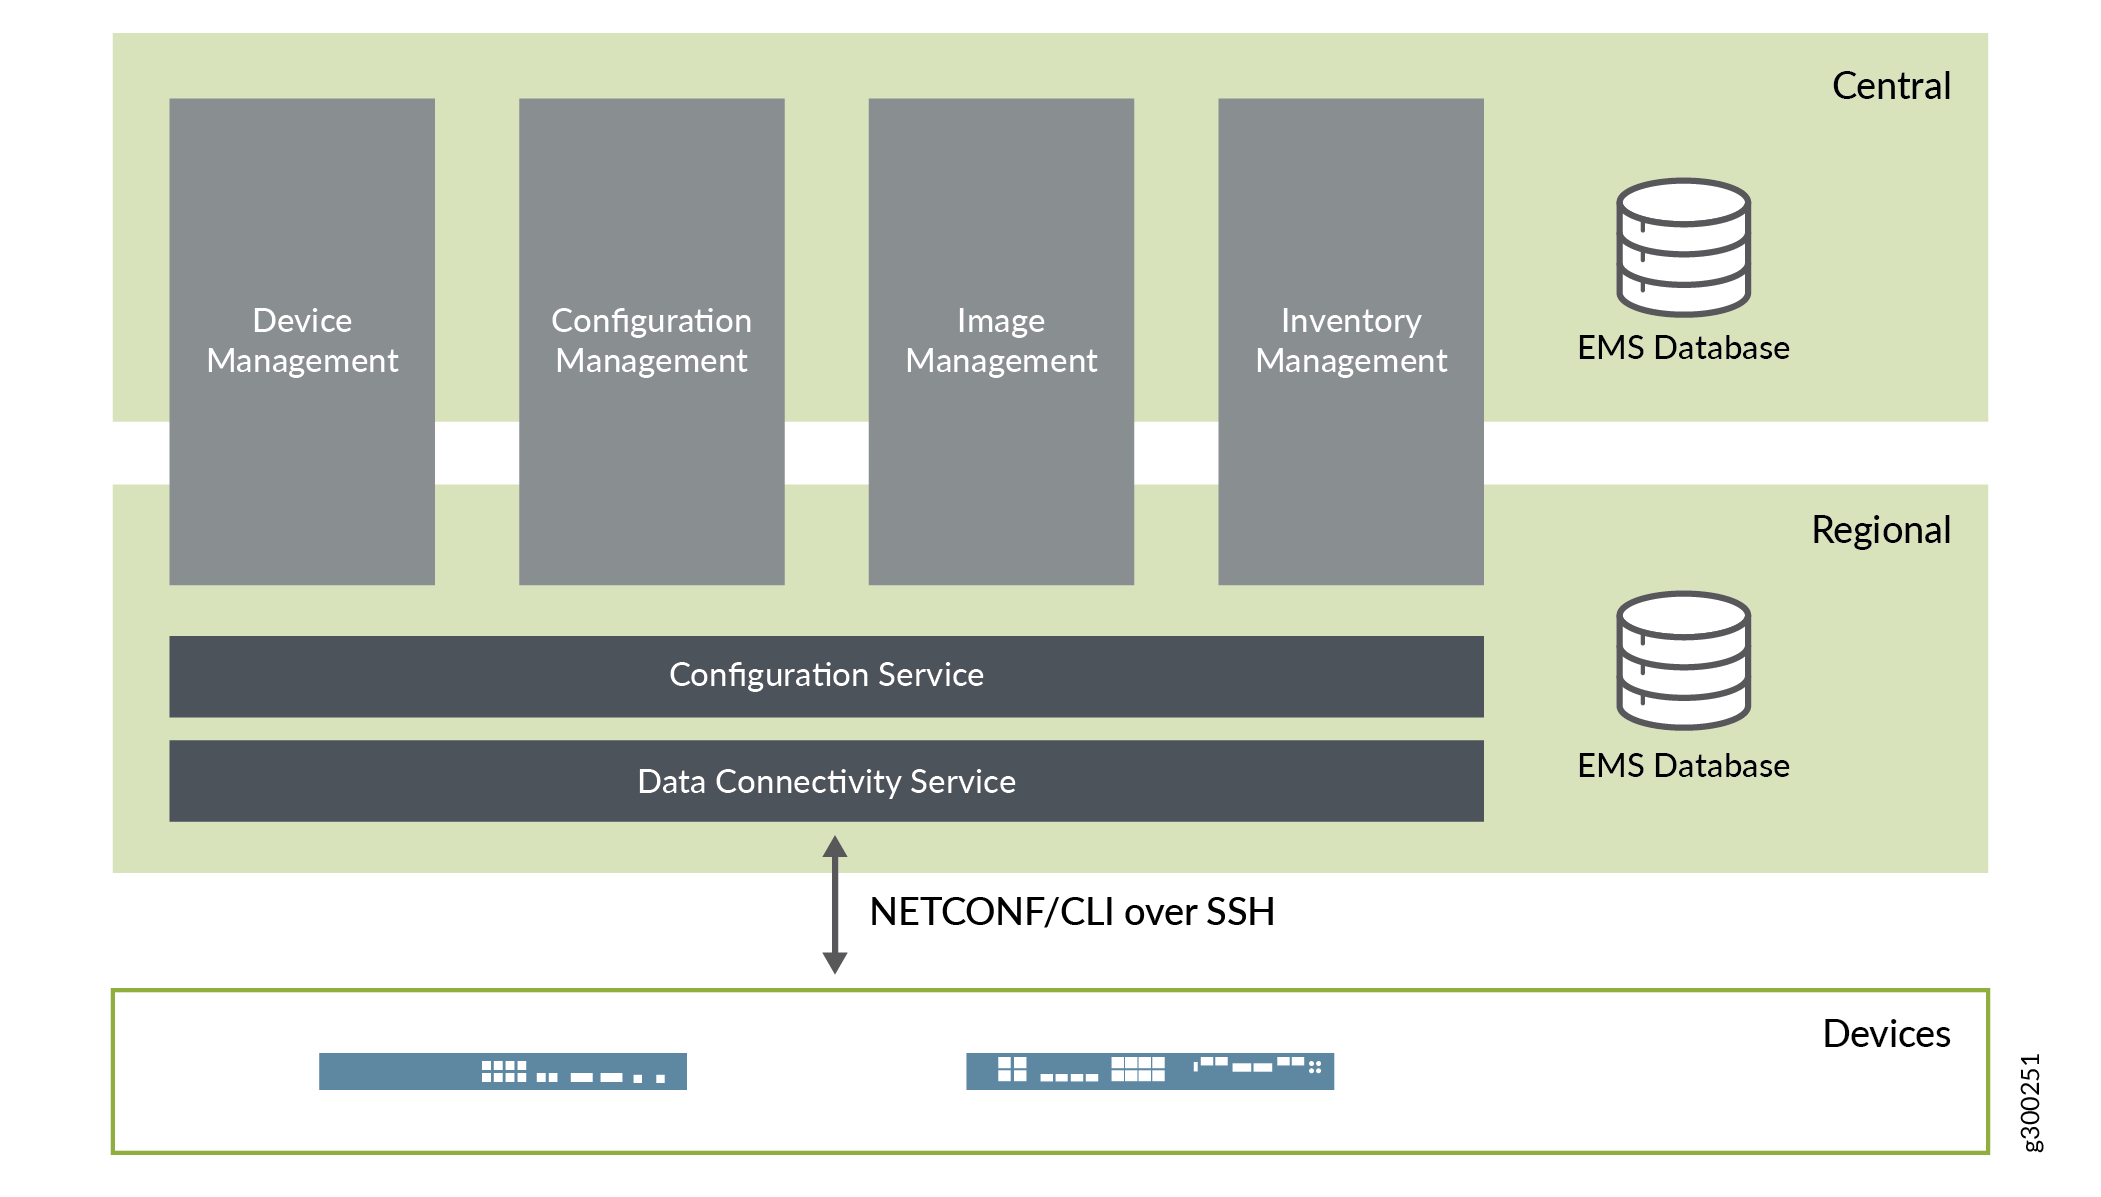  CSO Microservices for Element
Management